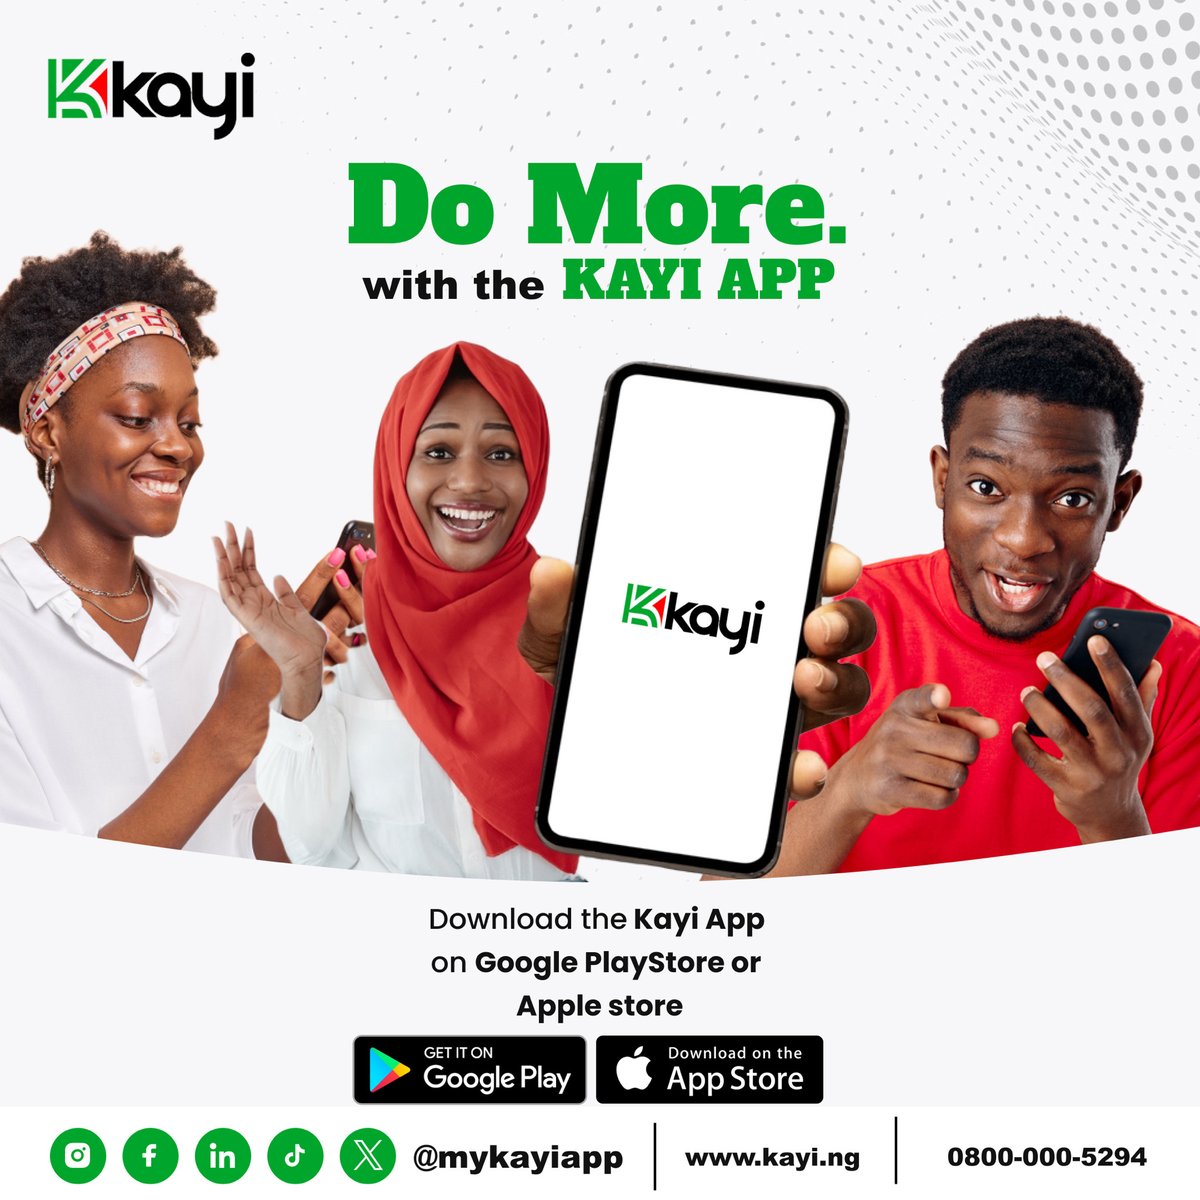 Young, vibrant, and ready to redefine finance! MyKayiApp is your ticket to a digital world of possibilities. Download now on Google Store or Apple Store. Let's revolutionize banking together! 

#MyKayiApp #NowLive #Kayiway #DownloadNow #Bankingwithoutlimits #downloadmykayiapp